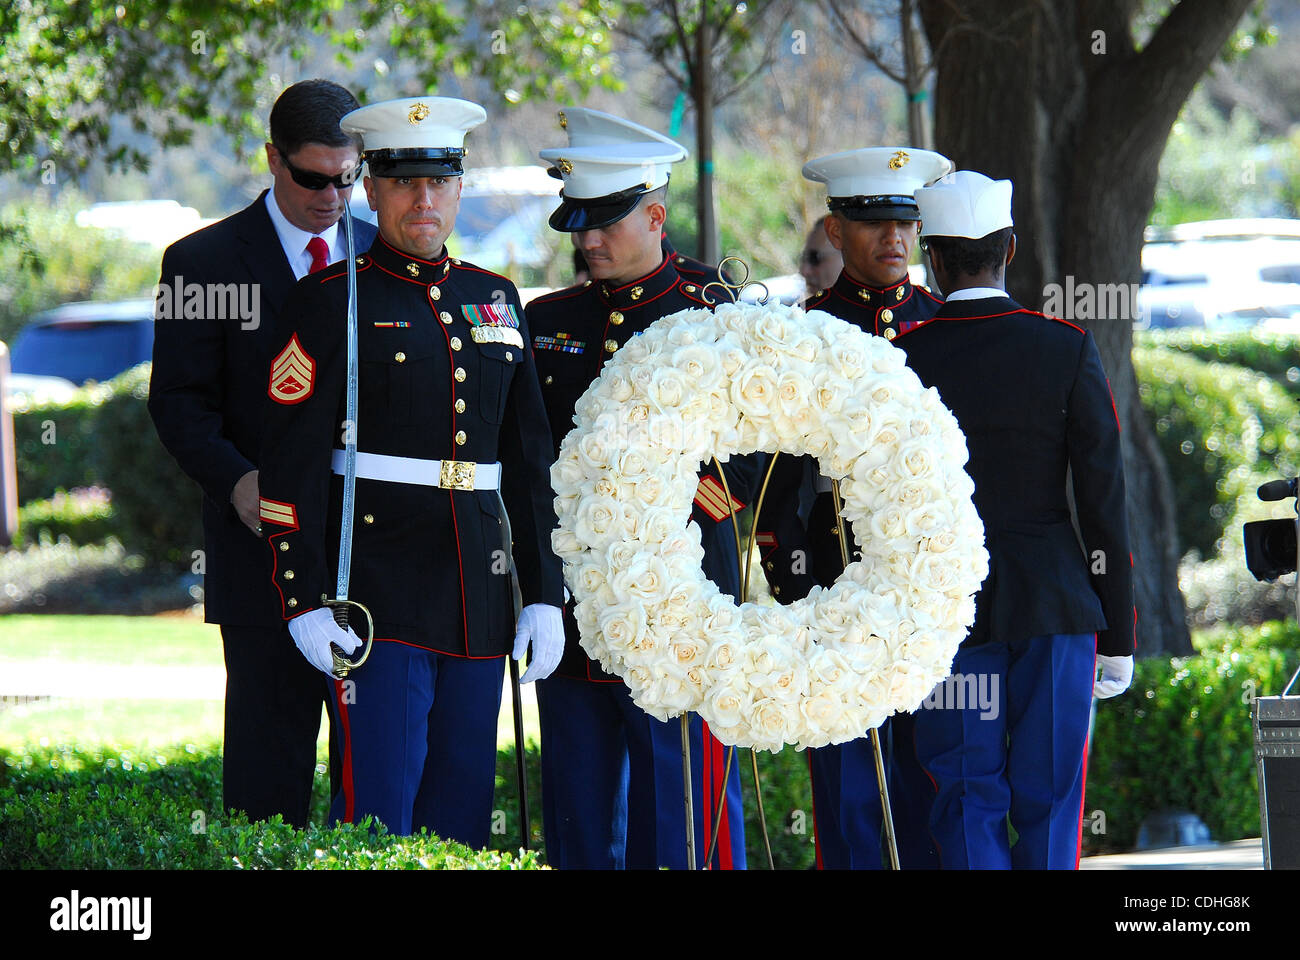 Feb. 6, 2011 - Simi Valley, California, U.S. - A U.S. Marine Corps honor guard prepares for the official wreath laying ceremony during the birthday celebration held in honor of Ronald Reagan at the Ronald Reagan Presidential Library. Ronald Reagan, the 40th President of the United States, would have Stock Photo